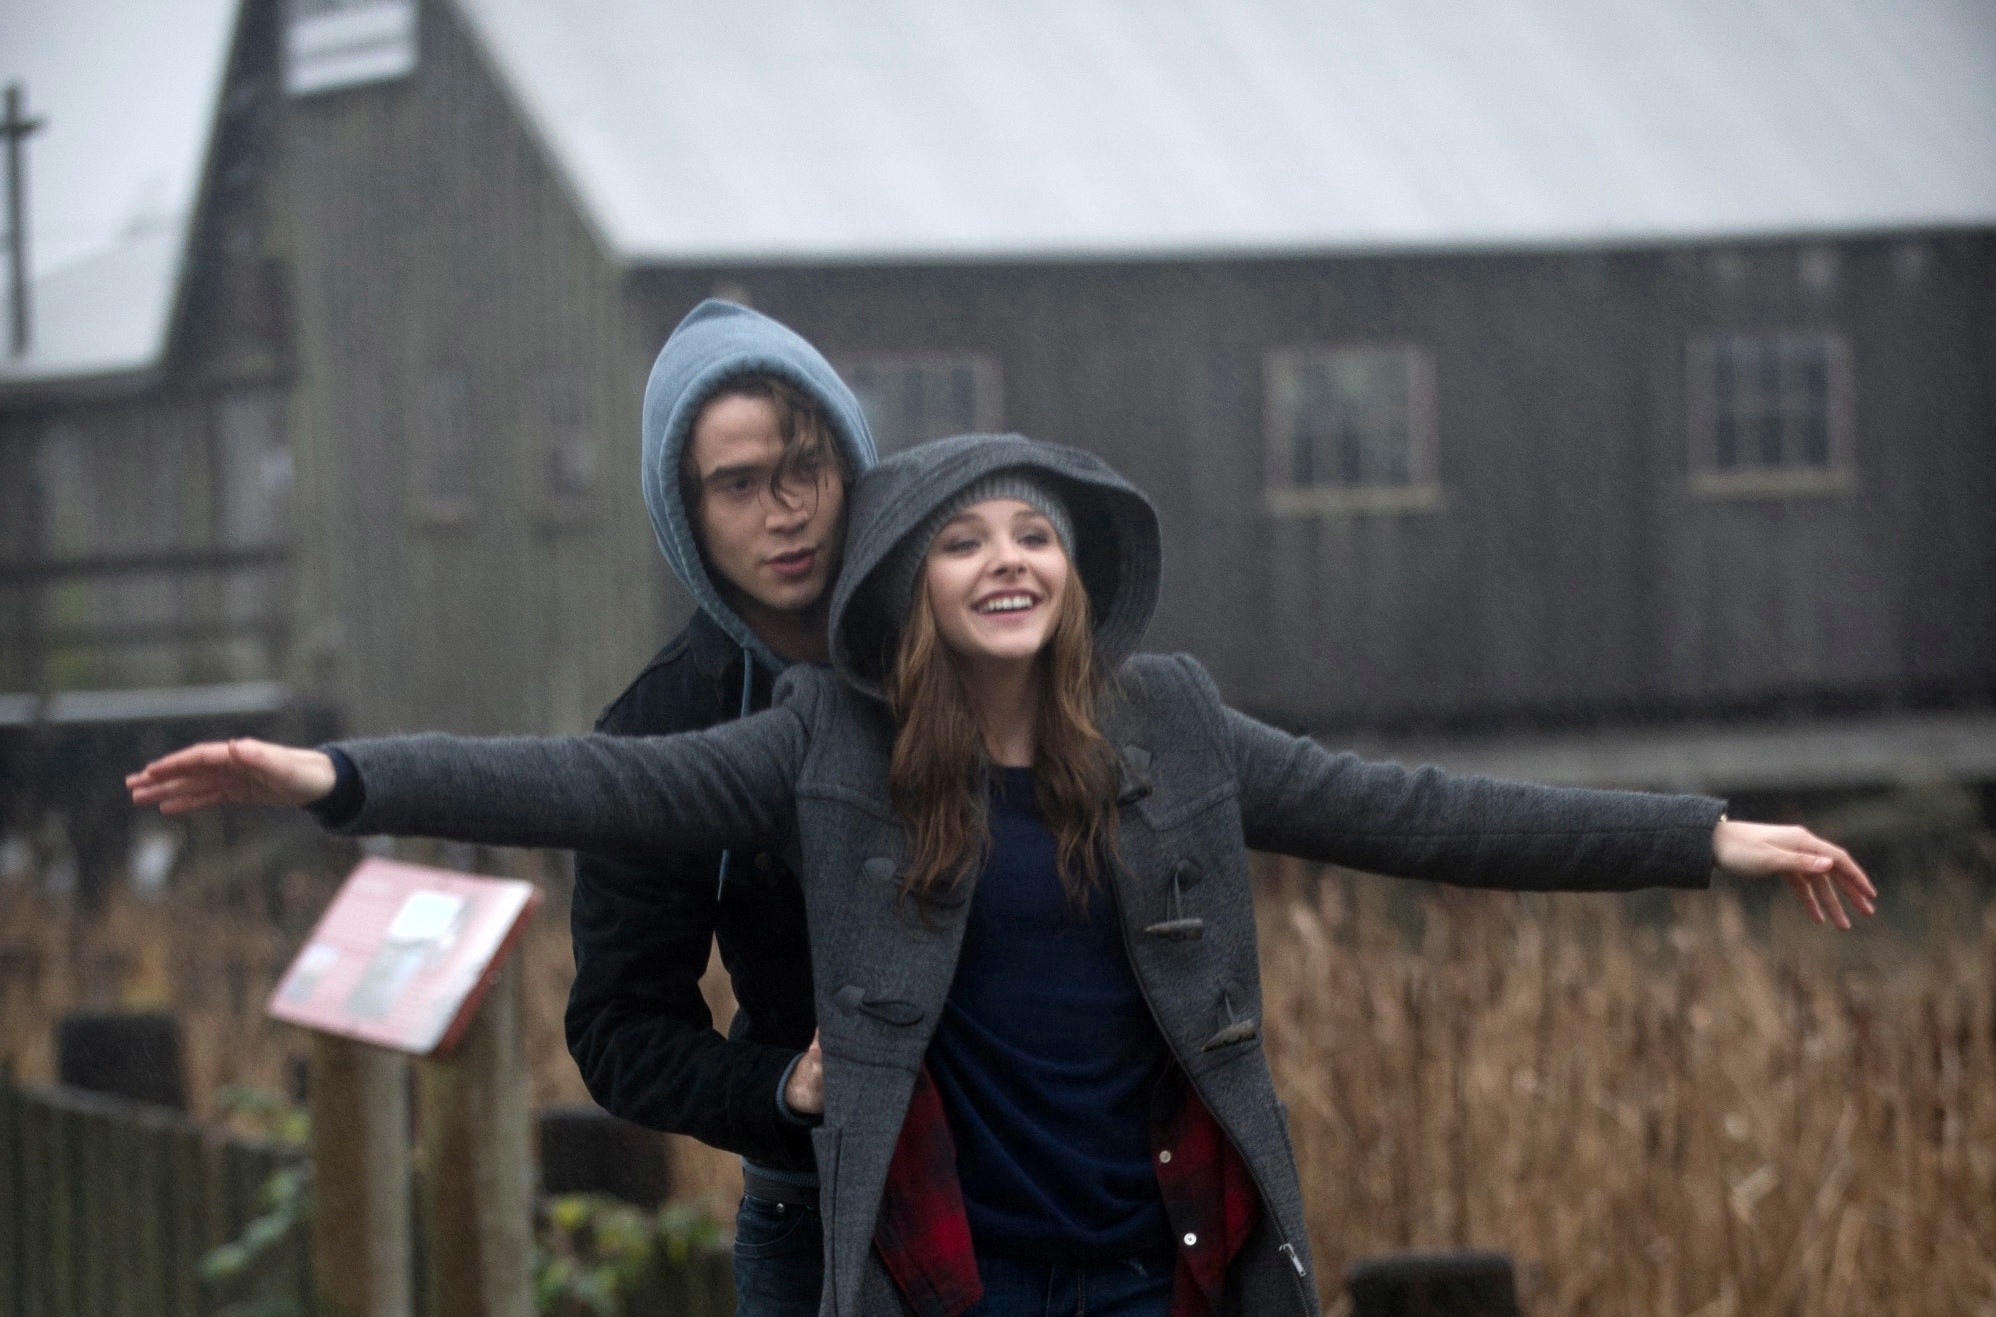 Jamie Blackley stars as Adam and Chloe Moretz stars as Mia Hall in Warner Bros. Pictures' If I Stay (2014)